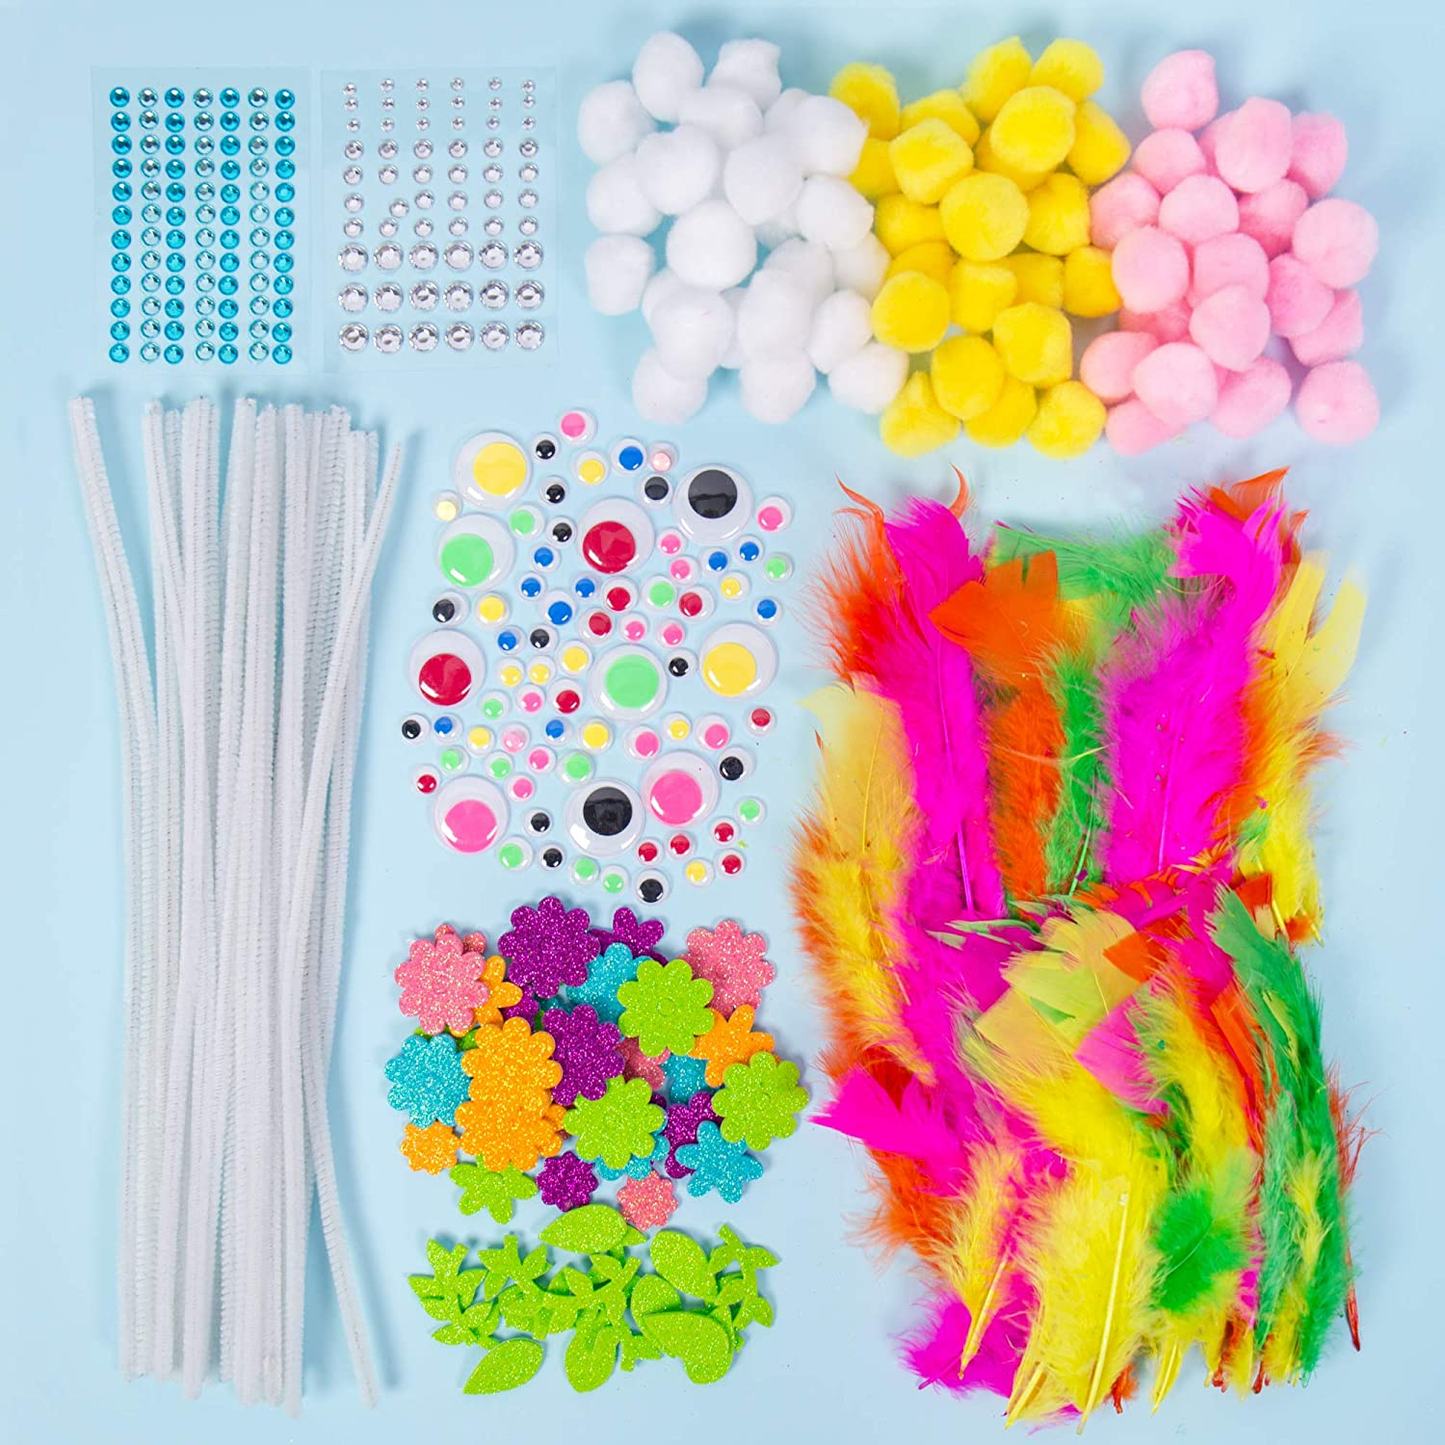 Rainbow Arts & Crafts Supplies.All in One Crafting &Embellishment Pack, Colorful Craft Set.Kit Includes Fuzzy Sticks, Pom-Pom’S,Sequins, Jewels,Jumbo Craft Sticks,Wood Sticks & More